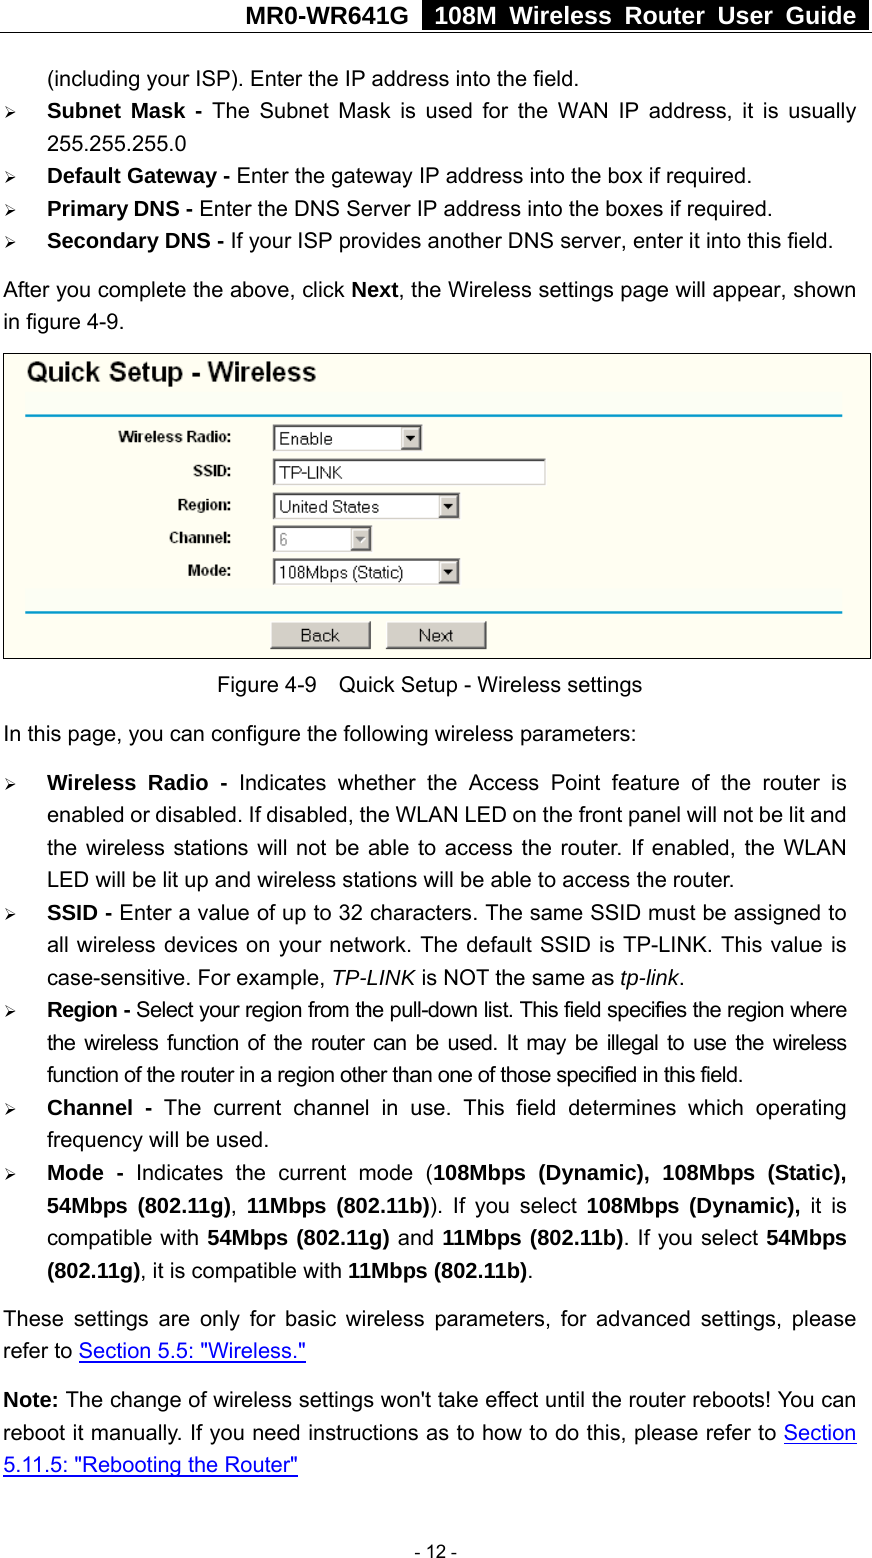 MR0-WR641G   108M Wireless Router User Guide  (including your ISP). Enter the IP address into the field. ¾ Subnet Mask - The Subnet Mask is used for the WAN IP address, it is usually 255.255.255.0 ¾ Default Gateway - Enter the gateway IP address into the box if required. ¾ Primary DNS - Enter the DNS Server IP address into the boxes if required. ¾ Secondary DNS - If your ISP provides another DNS server, enter it into this field. After you complete the above, click Next, the Wireless settings page will appear, shown in figure 4-9.  Figure 4-9    Quick Setup - Wireless settings In this page, you can configure the following wireless parameters: ¾ Wireless Radio - Indicates whether the Access Point feature of the router is enabled or disabled. If disabled, the WLAN LED on the front panel will not be lit and the wireless stations will not be able to access the router. If enabled, the WLAN LED will be lit up and wireless stations will be able to access the router. ¾ SSID - Enter a value of up to 32 characters. The same SSID must be assigned to all wireless devices on your network. The default SSID is TP-LINK. This value is case-sensitive. For example, TP-LINK is NOT the same as tp-link. ¾ Region - Select your region from the pull-down list. This field specifies the region where the wireless function of the router can be used. It may be illegal to use the wireless function of the router in a region other than one of those specified in this field. ¾ Channel - The current channel in use. This field determines which operating frequency will be used. ¾ Mode - Indicates the current mode (108Mbps (Dynamic), 108Mbps (Static), 54Mbps (802.11g),  11Mbps (802.11b)). If you select 108Mbps (Dynamic), it is compatible with 54Mbps (802.11g) and 11Mbps (802.11b). If you select 54Mbps (802.11g), it is compatible with 11Mbps (802.11b). These settings are only for basic wireless parameters, for advanced settings, please refer to Section 5.5: &quot;Wireless.&quot;  Note: The change of wireless settings won&apos;t take effect until the router reboots! You can reboot it manually. If you need instructions as to how to do this, please refer to Section 5.11.5: &quot;Rebooting the Router&quot; - 12 - 